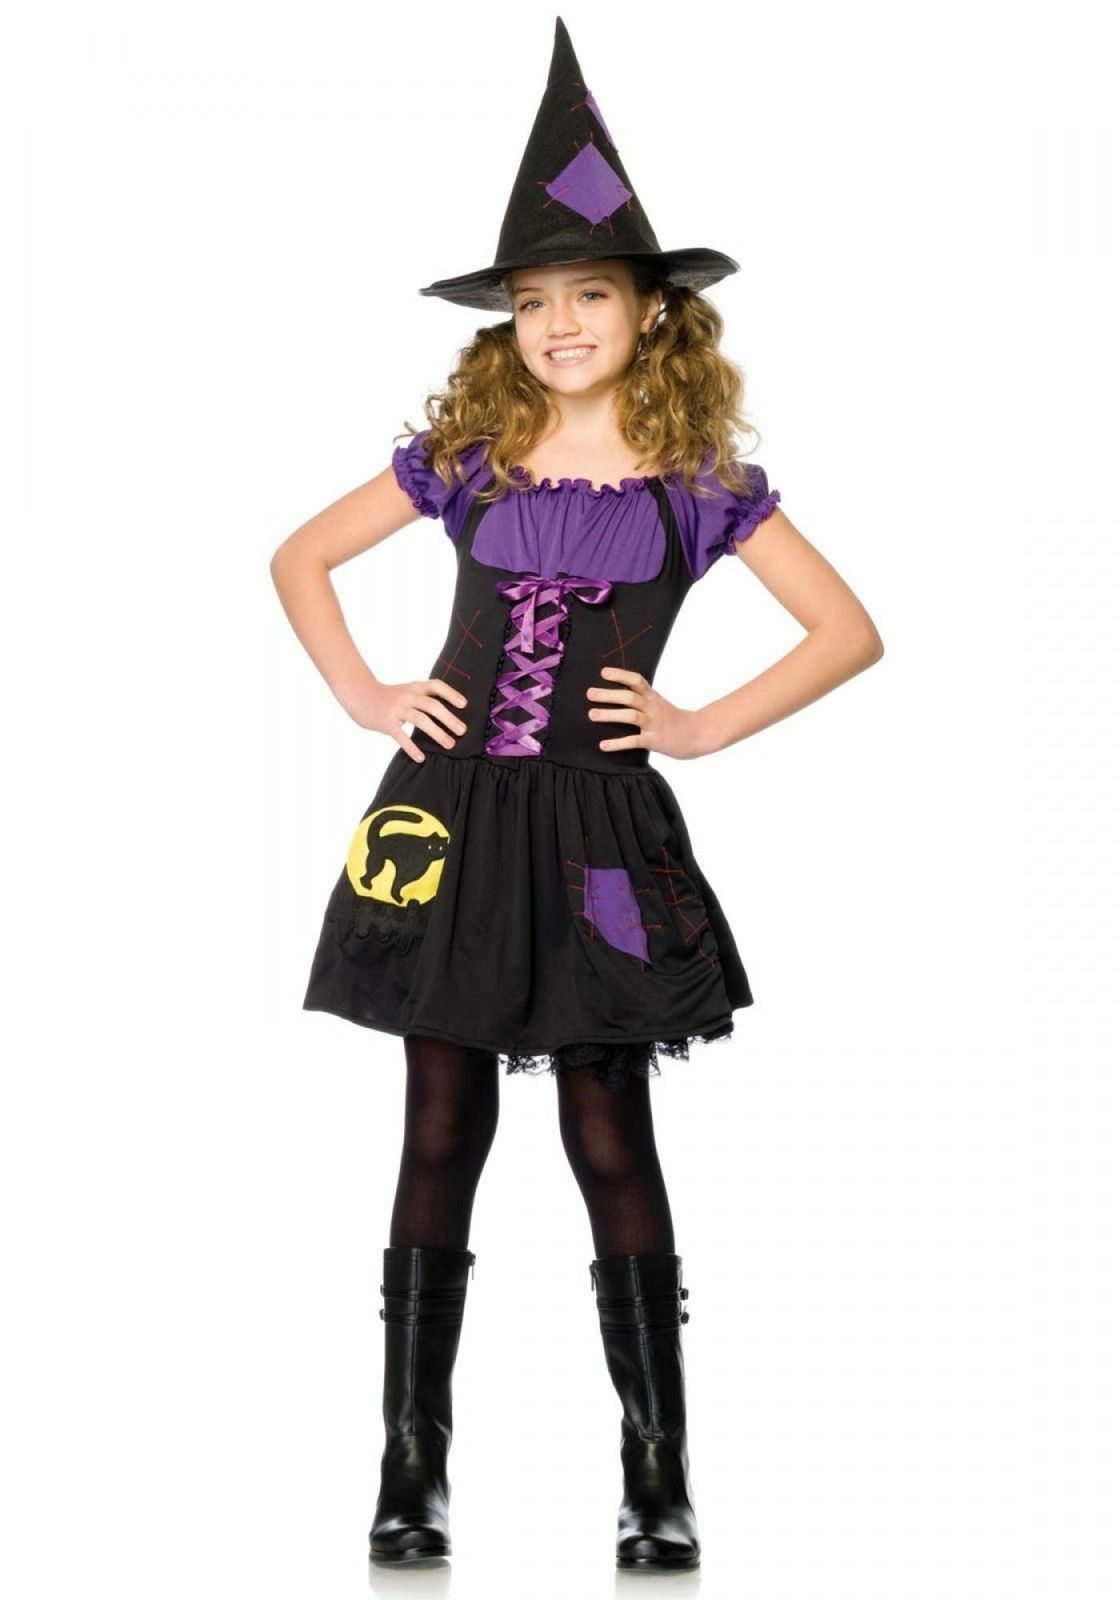 BLACK CAT WITCH CHILD HALLOWEEN COSTUME GIRL'S SIZE X-SMALL 3-4 - $26.61